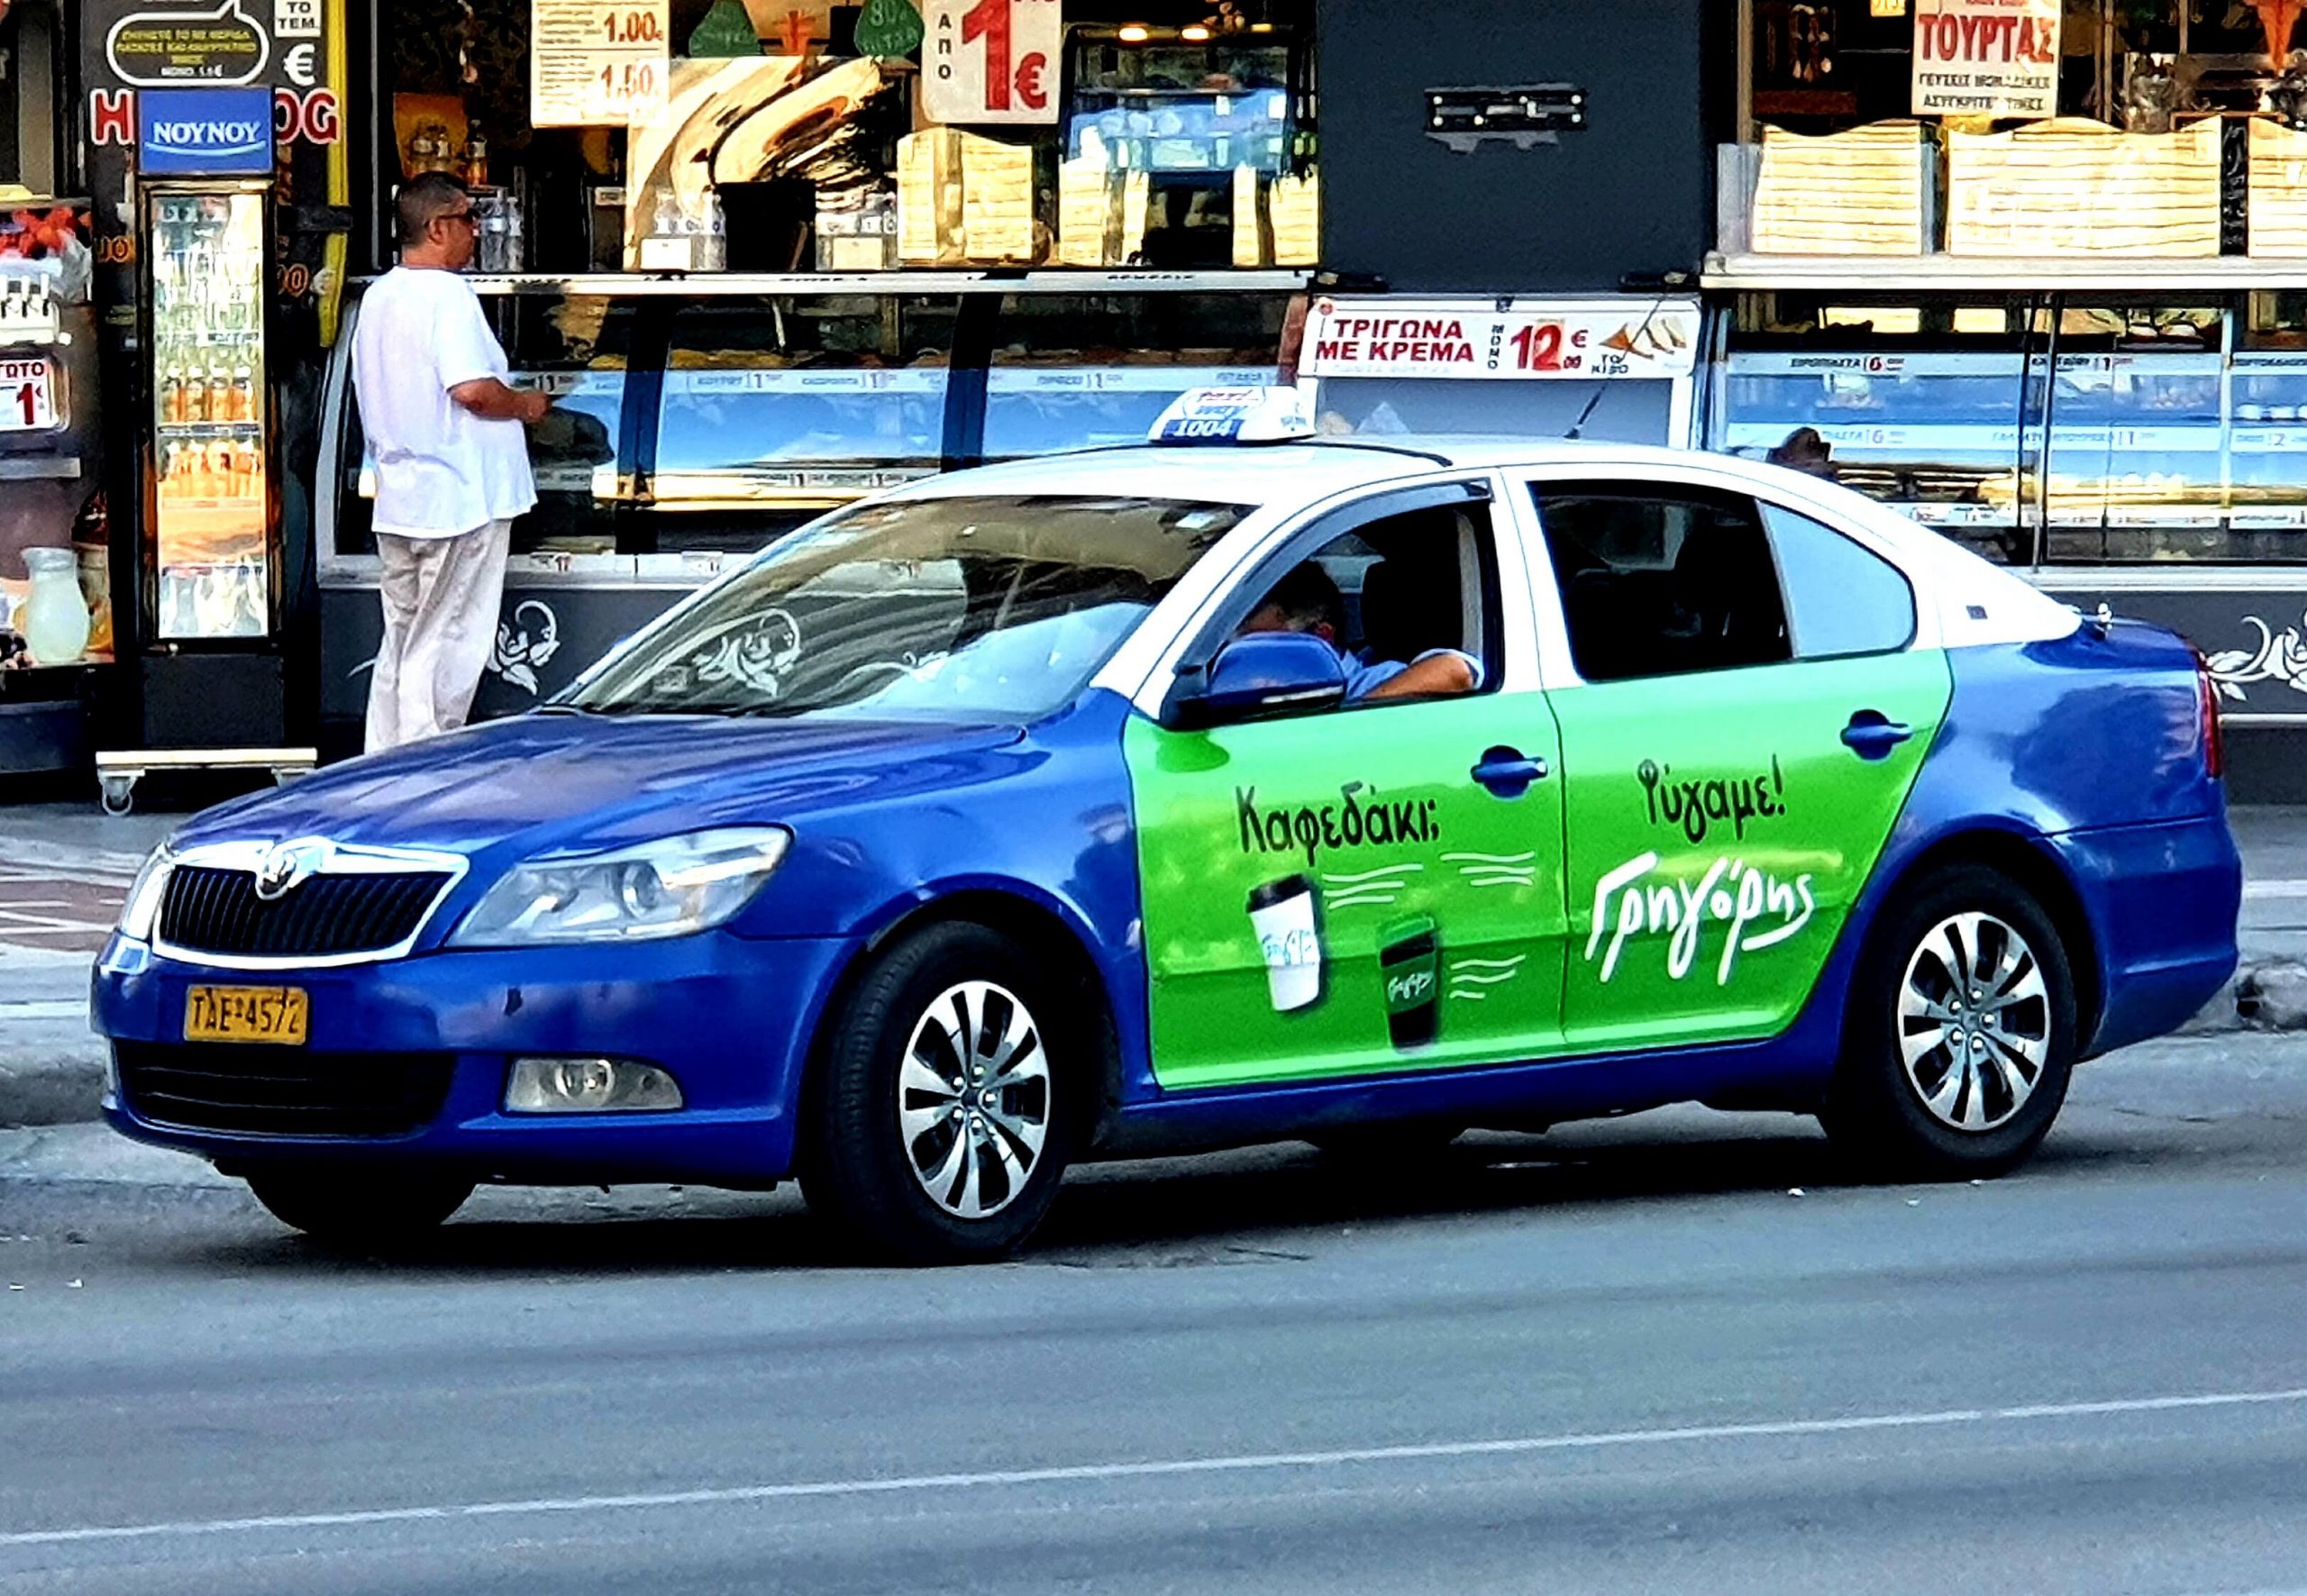 taxis in Thessaloniki, Greece